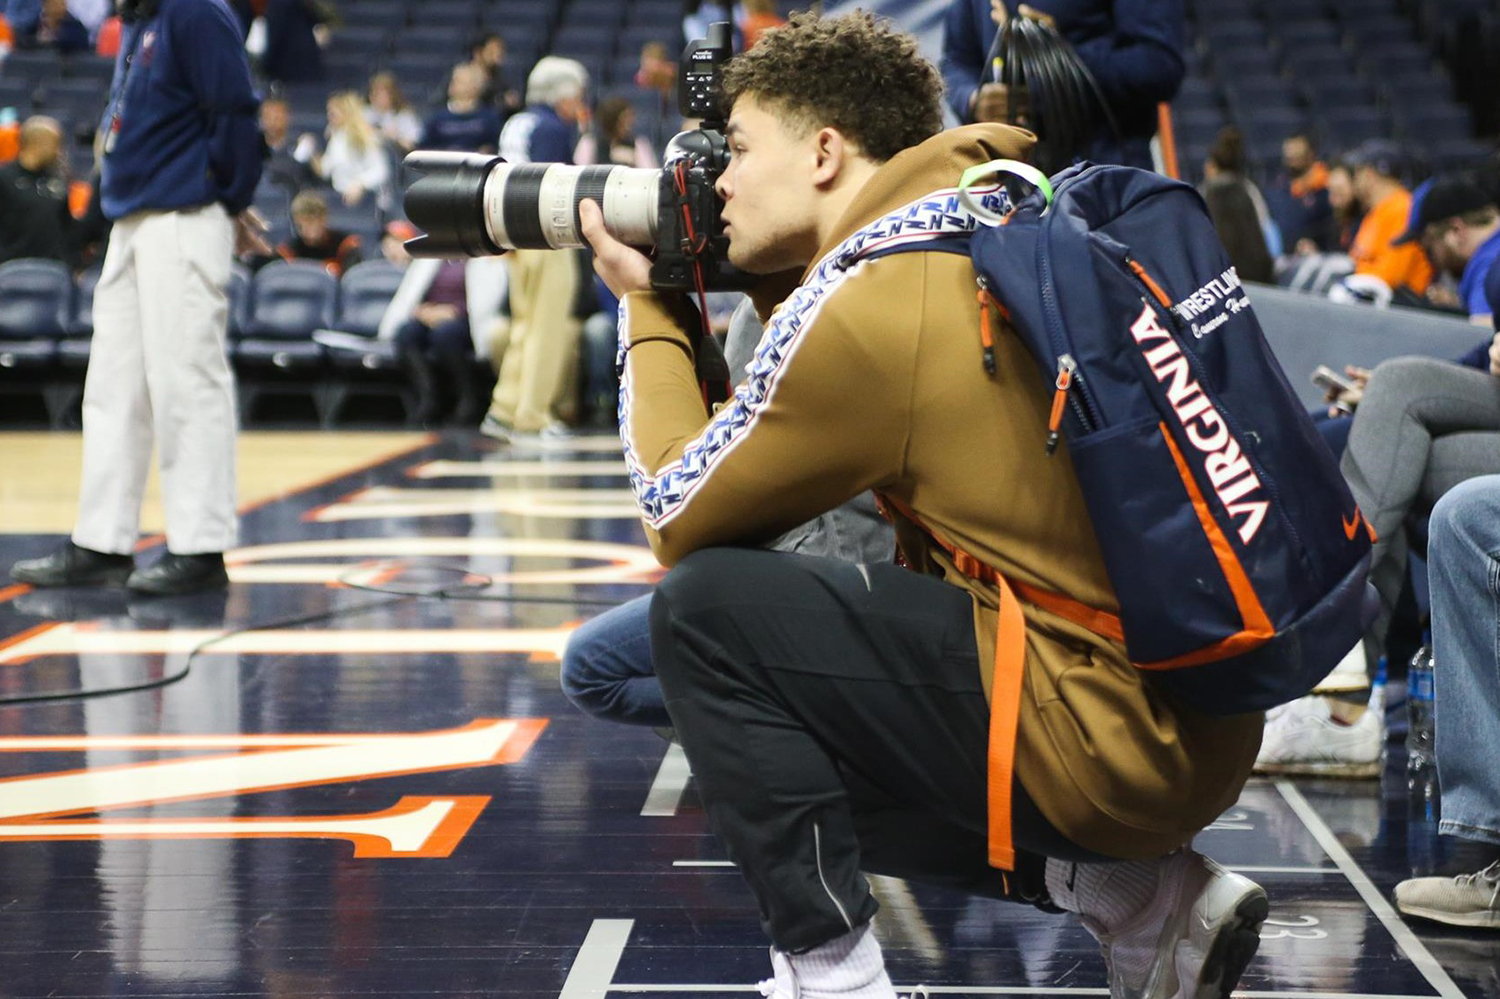 Cam Harrell on the sidelines of a basketball court taking pictures